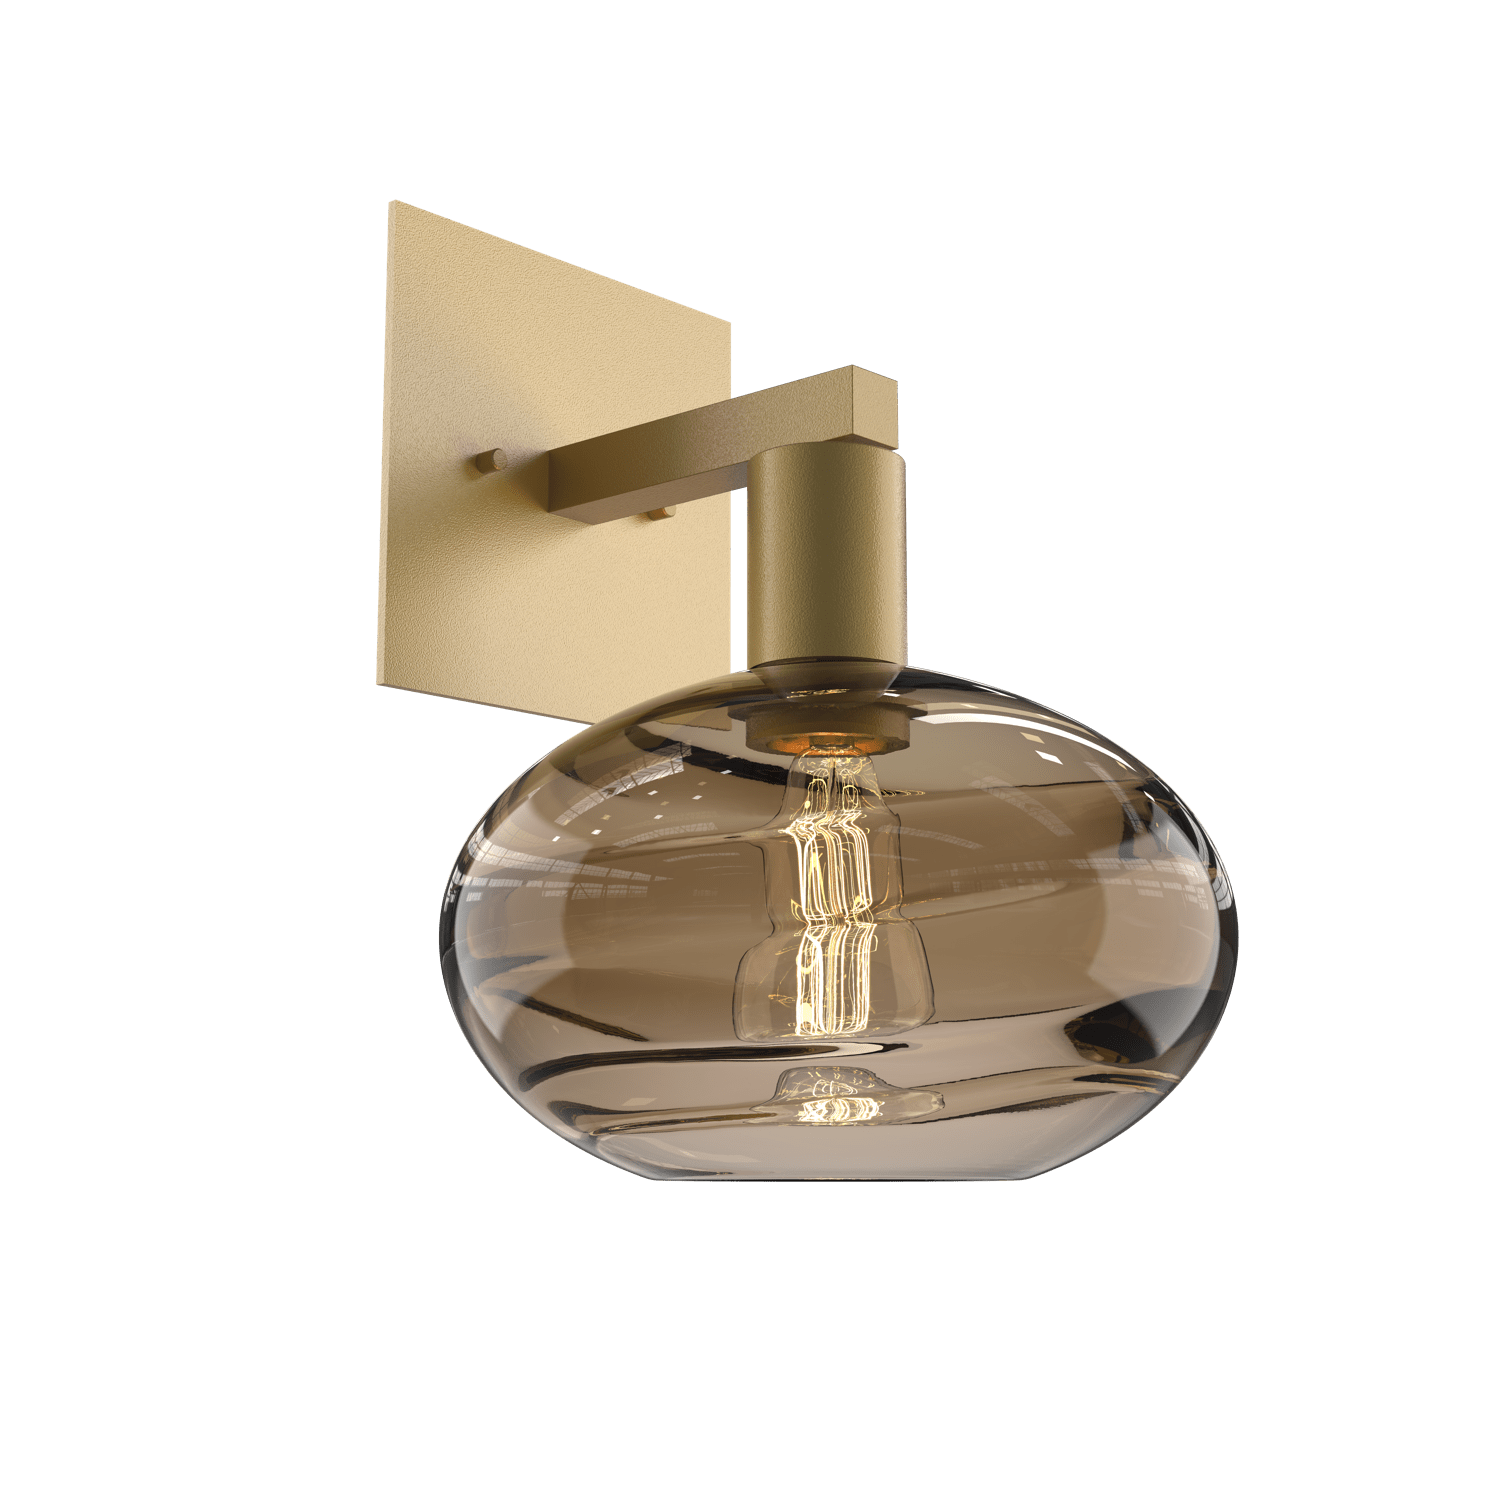 IDB0036-11-GB-OB-Hammerton-Studio-Optic-Blown-Glass-Coppa-wall-sconce-with-gilded-brass-finish-and-optic-bronze-blown-glass-shades-and-incandescent-lamping